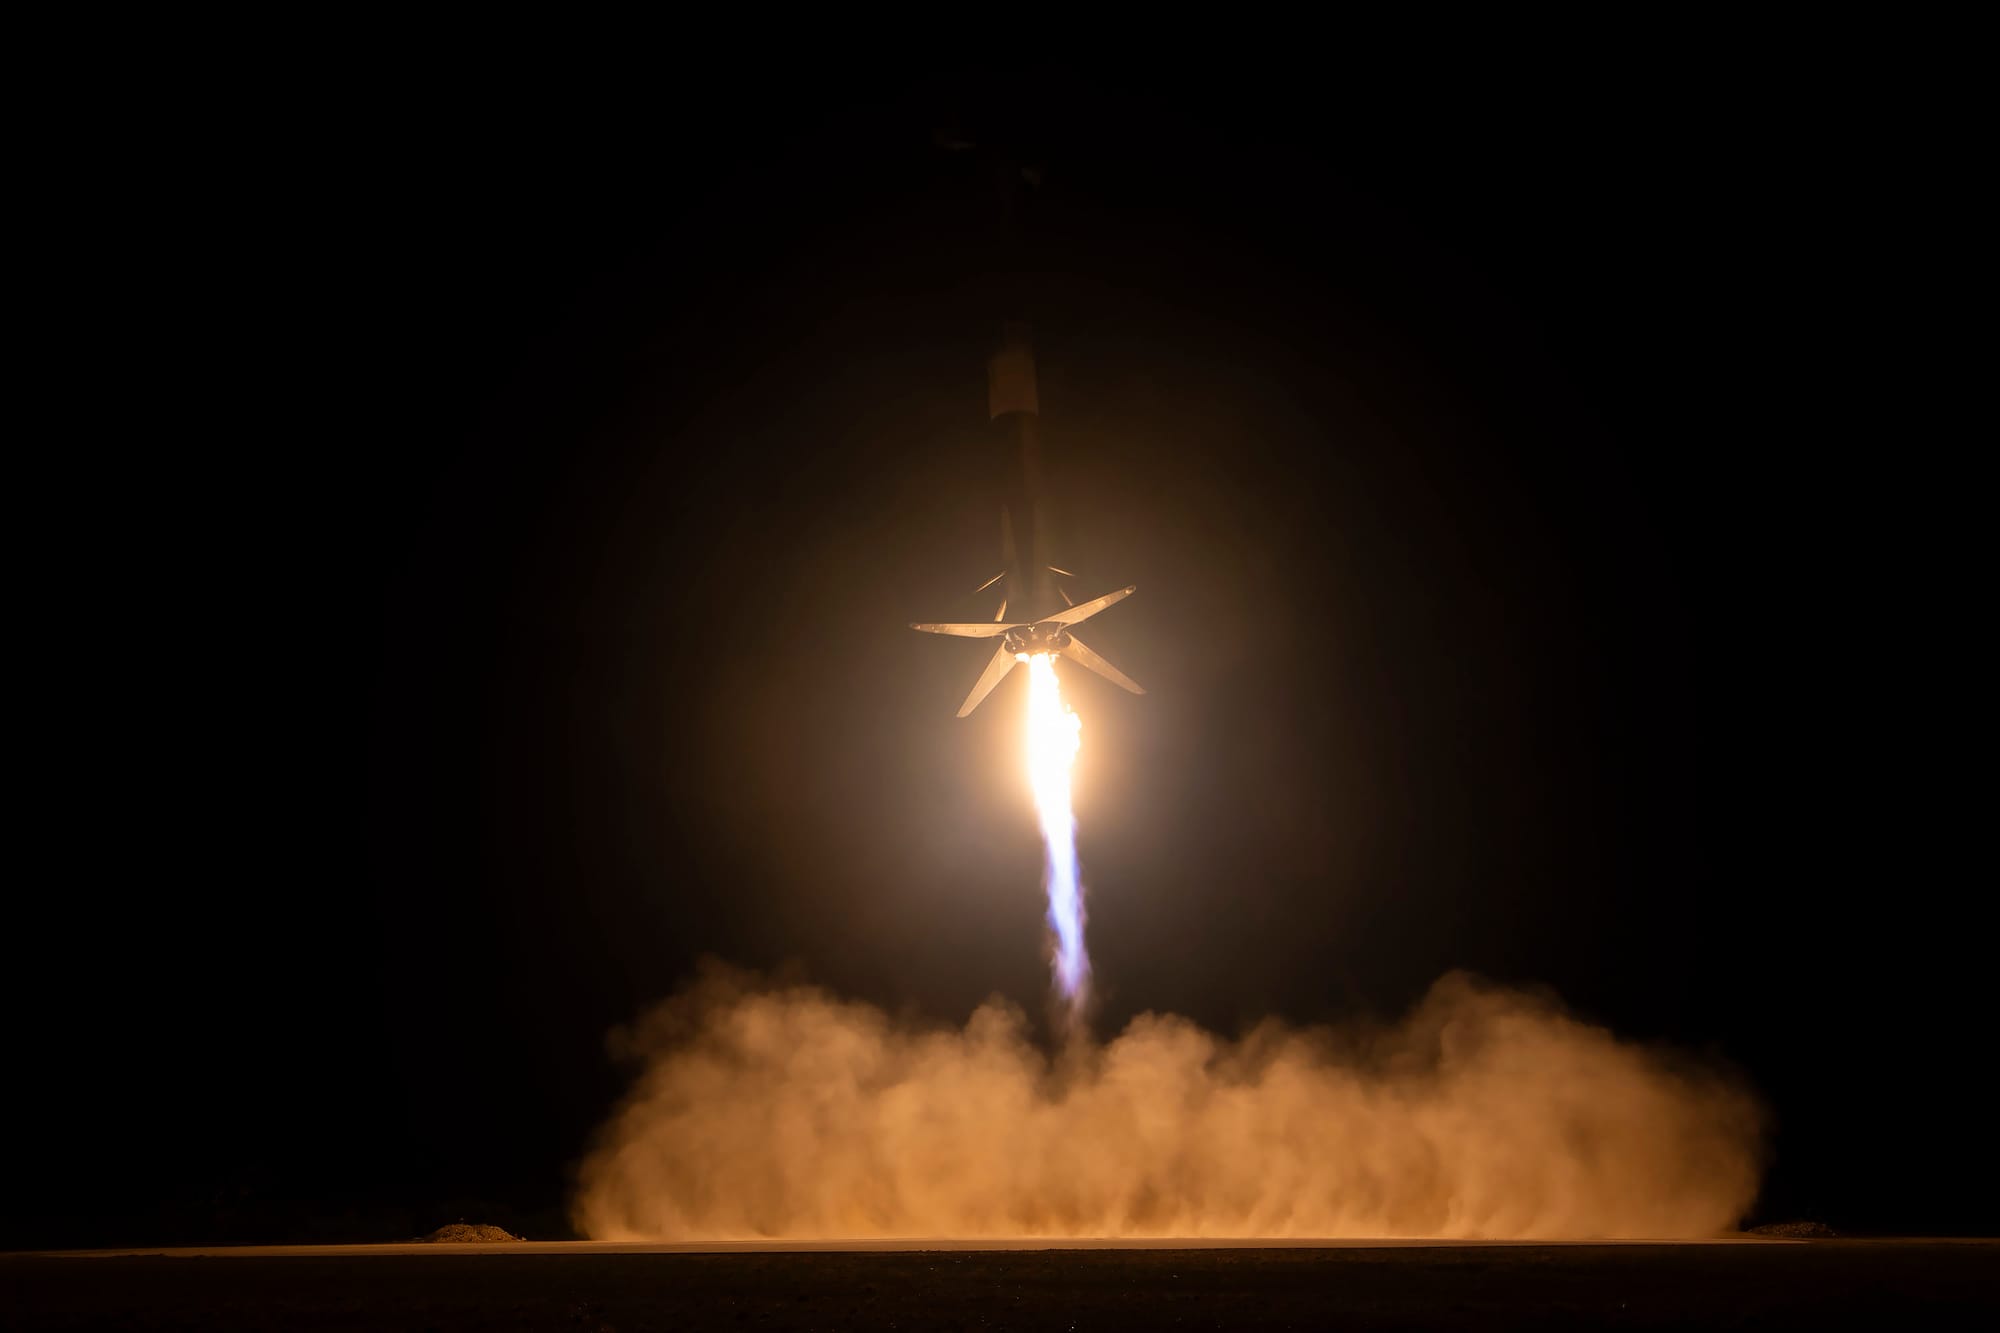 Booster B1060 landing at Landing Zone 1 in Cape Canaveral. ©SpaceX